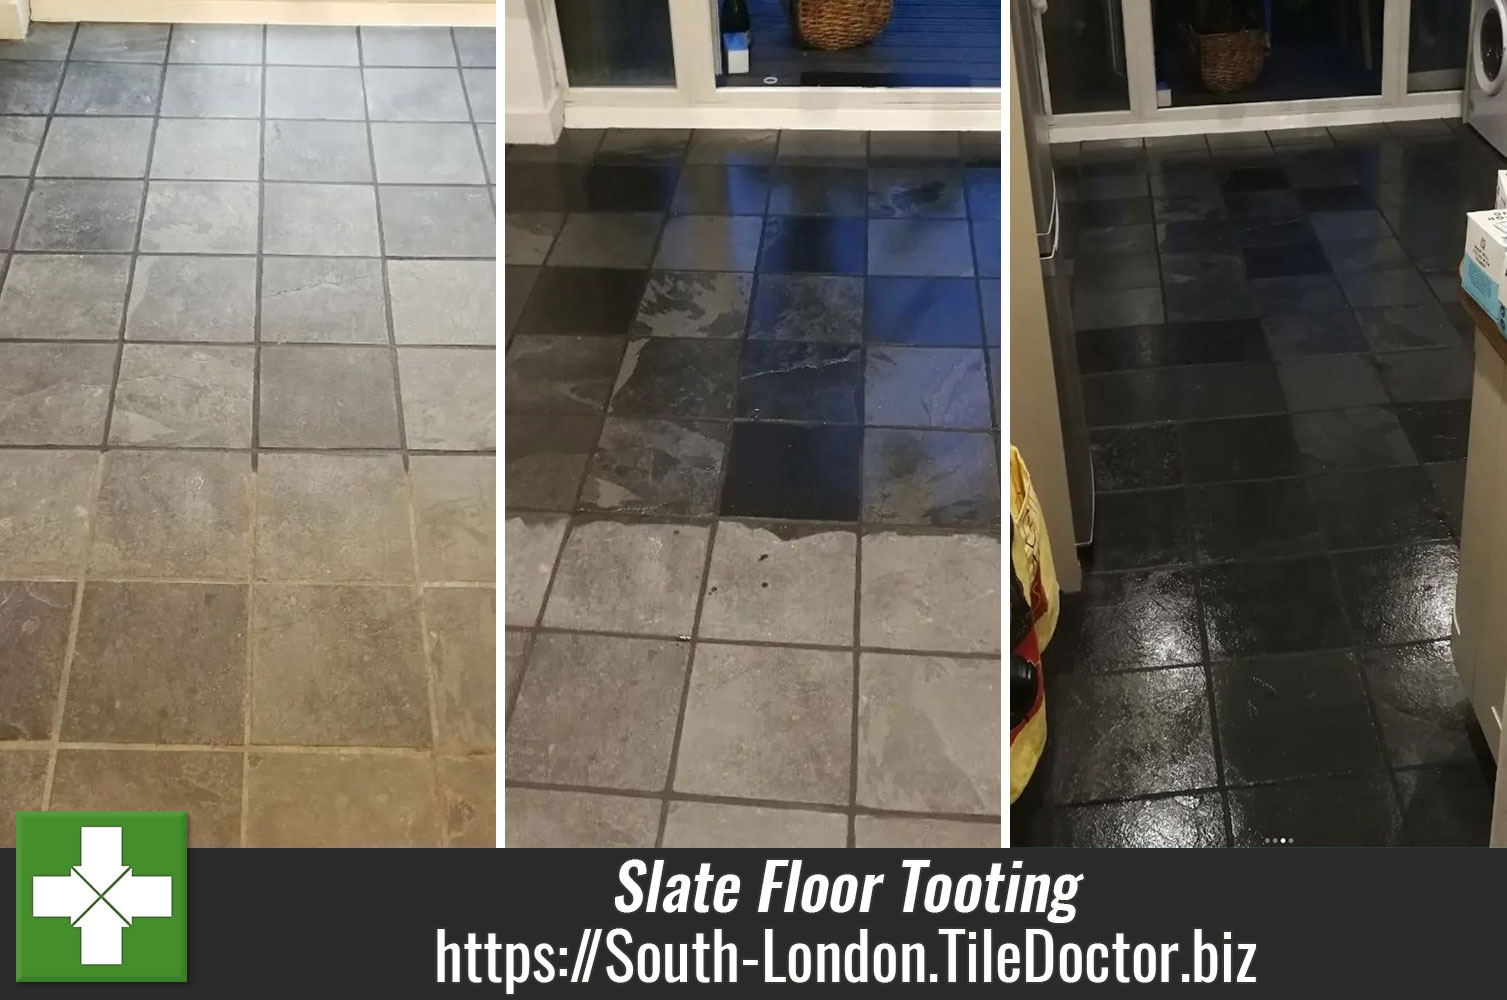 Applying Tile Doctor Black Grout Colourant to Match Black Slate Flooring in Tooting London